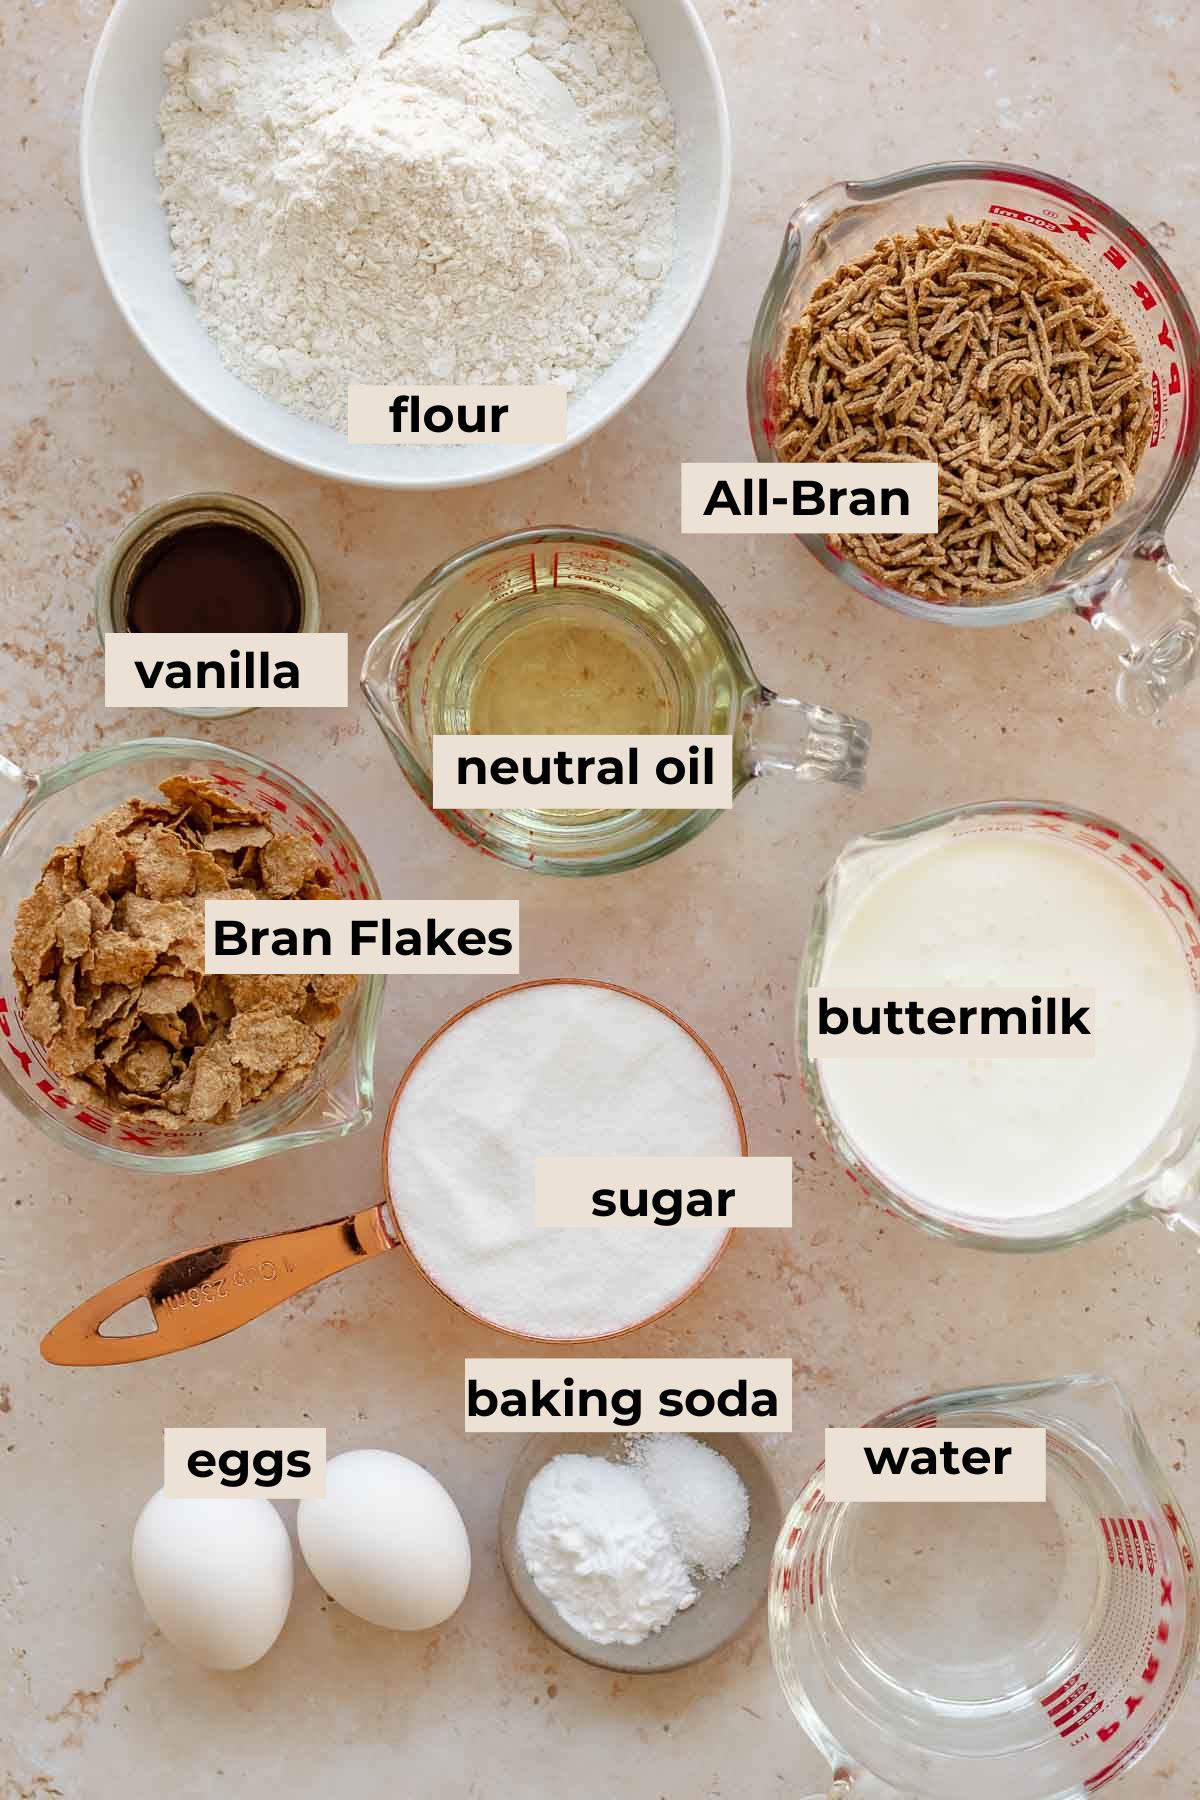 Ingredients for all-bran muffins.